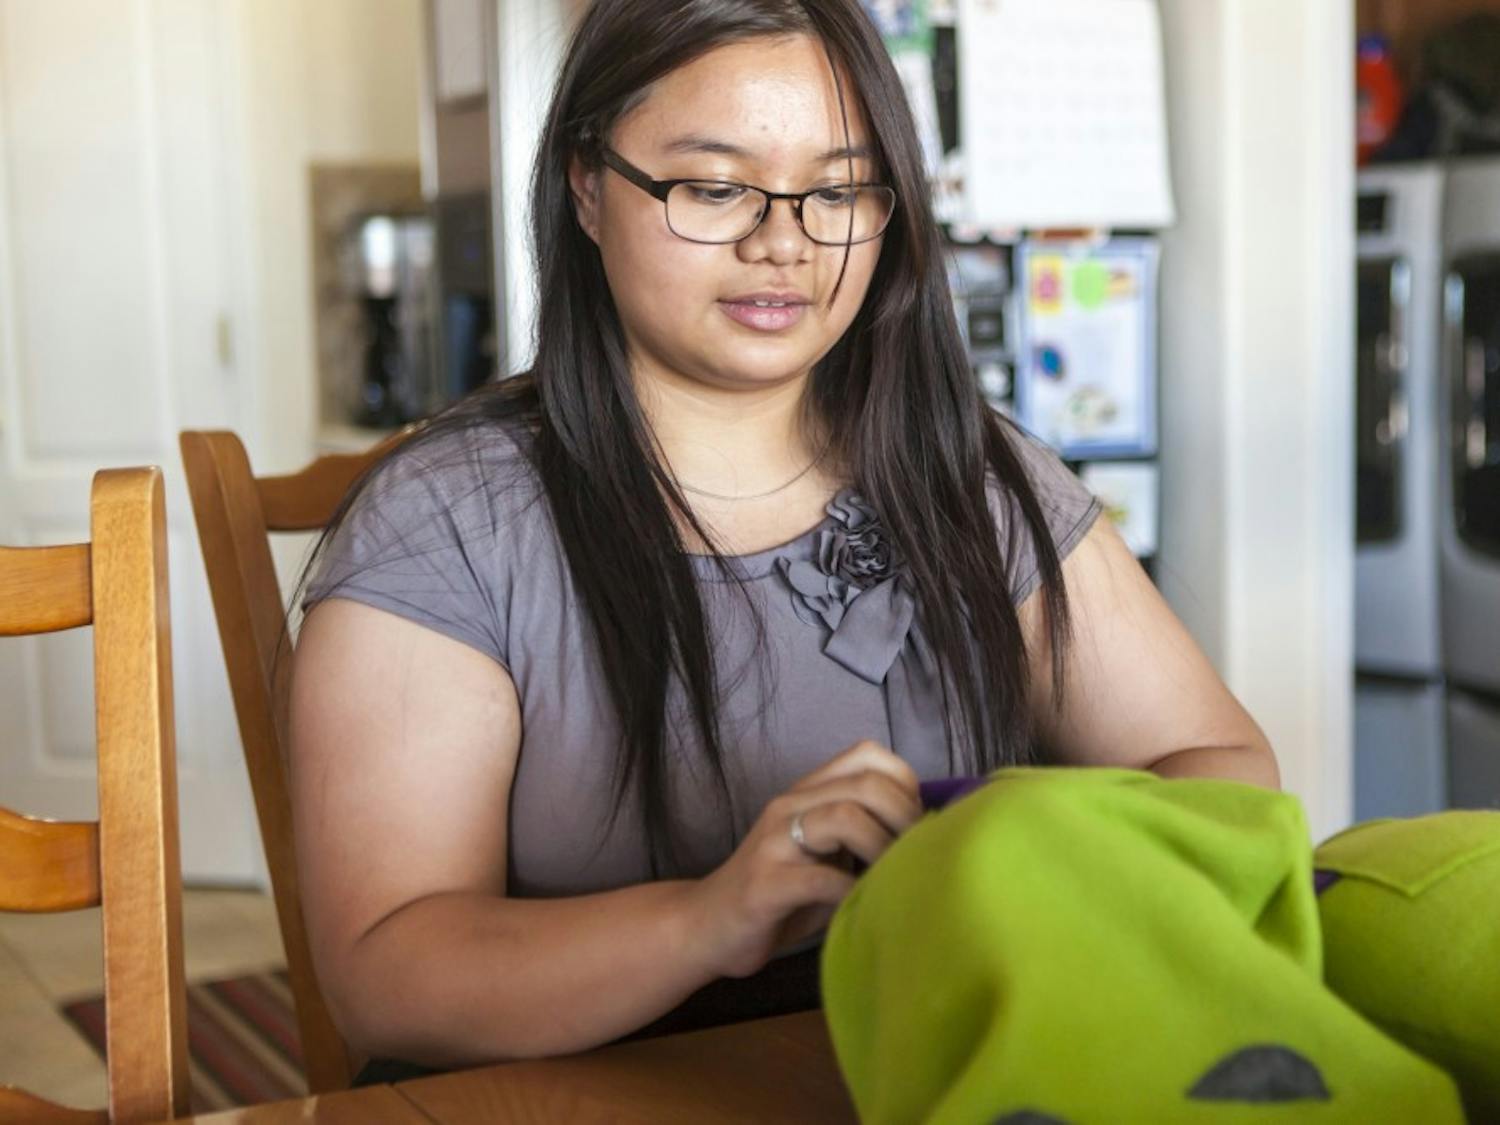 Avery Lopez, an engineering student at UNM, prepares the plush toys that she has manufactured for the ACE convention on Saturday, June 28. Lopez has turned her house into a plush toy factory after taking the advice from her professor to find a hobby.